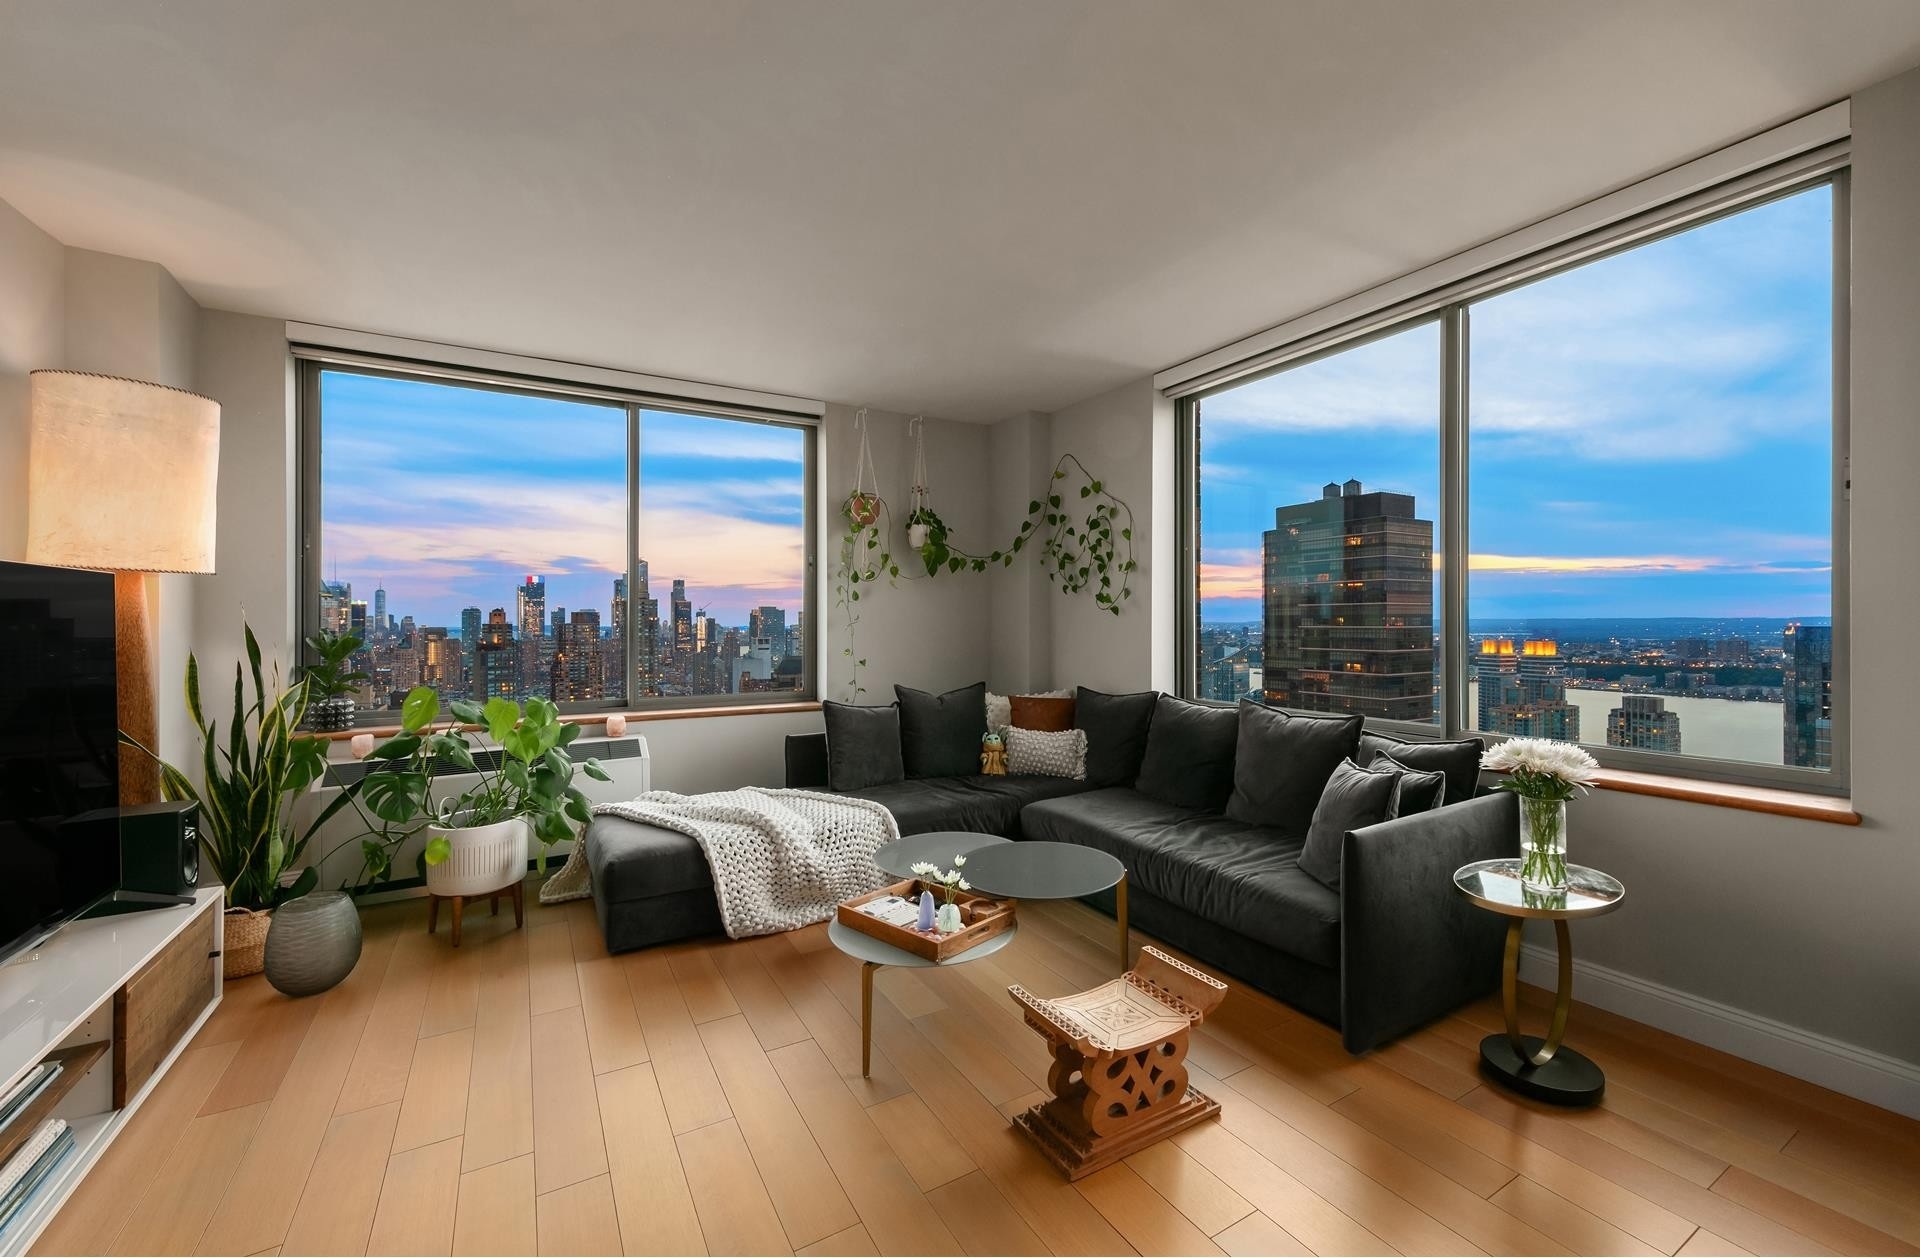 3. Condominiums for Sale at The Millennium Tower, 101 W 67TH ST, 52E Lincoln Square, New York, New York 10023